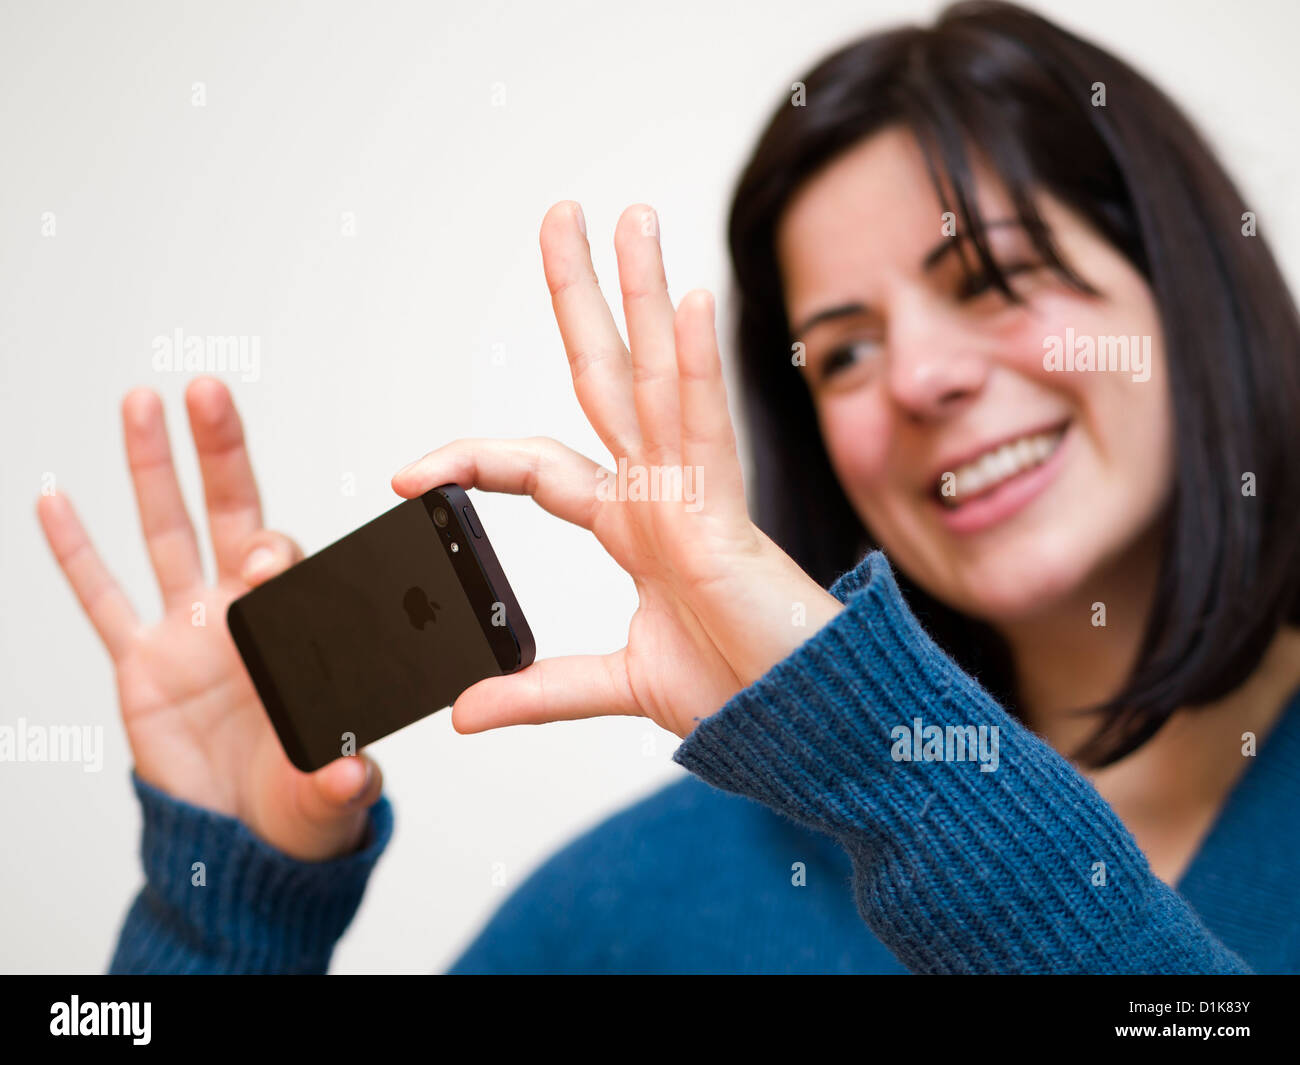 Young woman taking photos with iPhone 5 smartphone Stock Photo